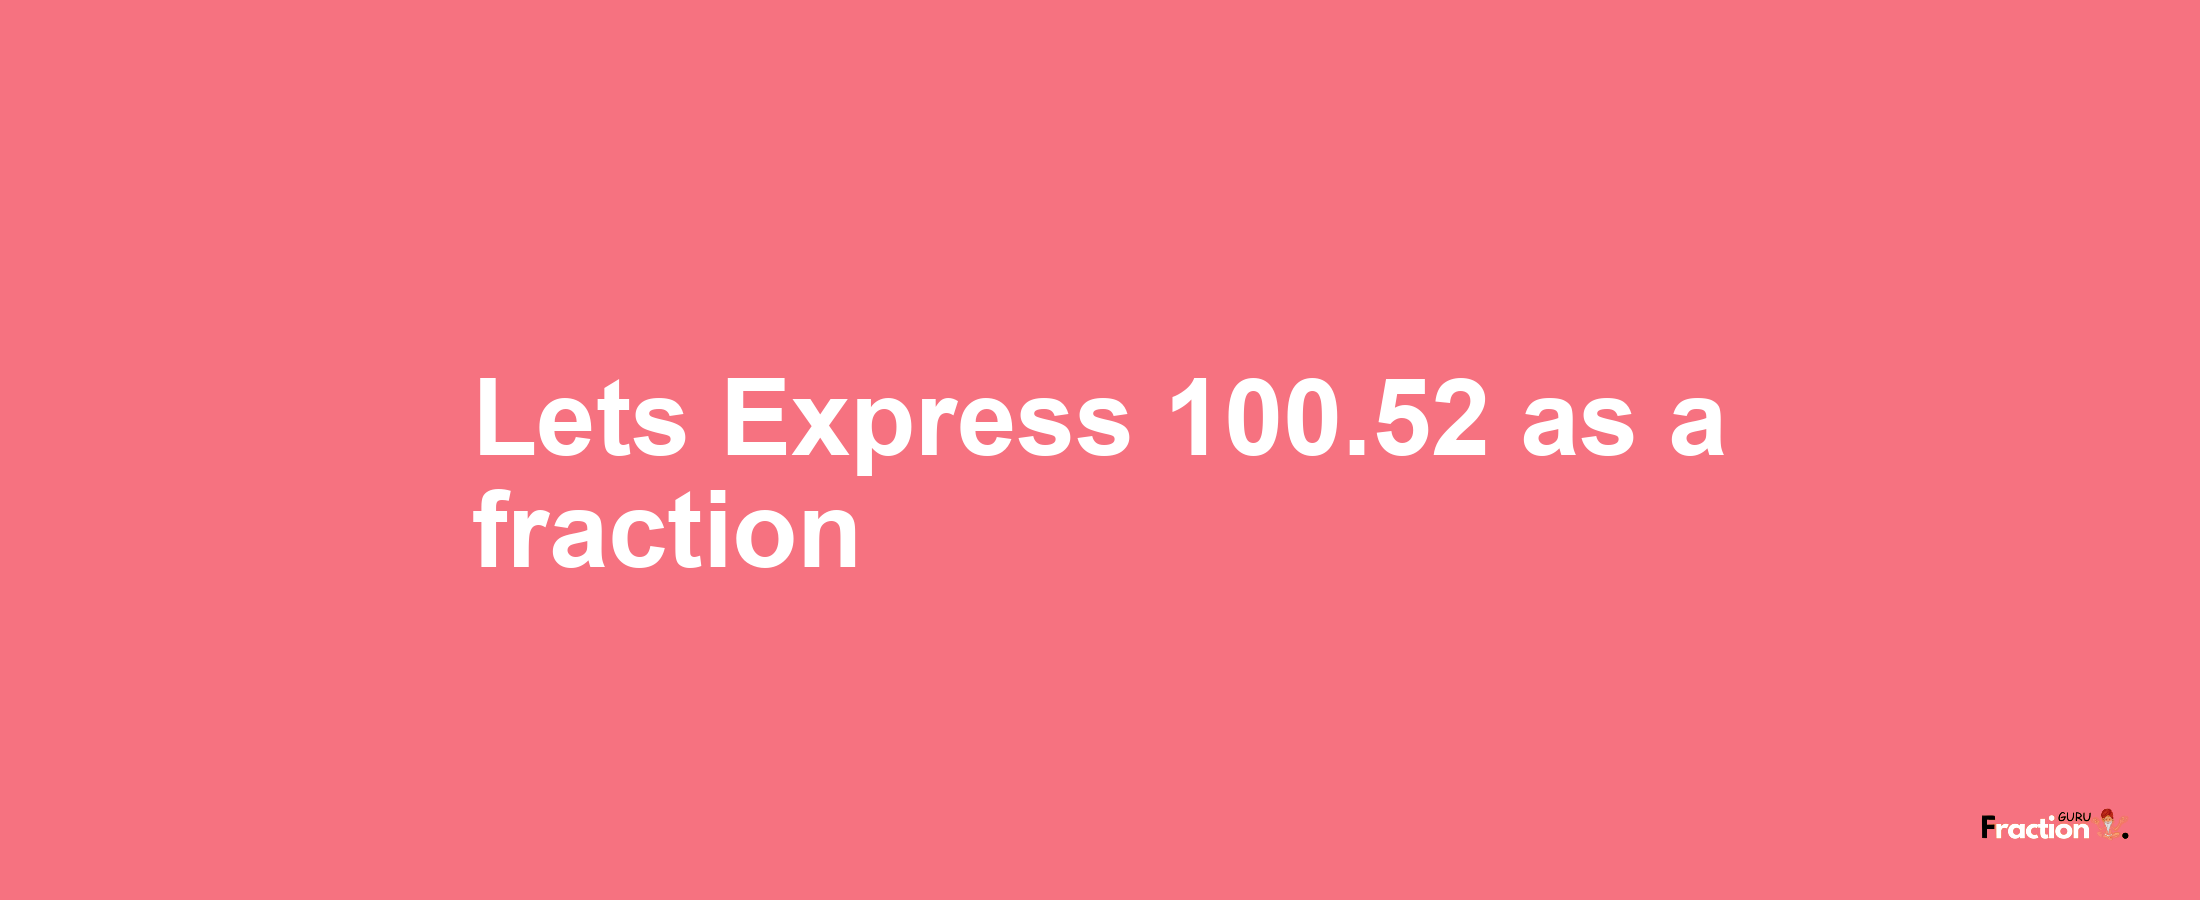 Lets Express 100.52 as afraction